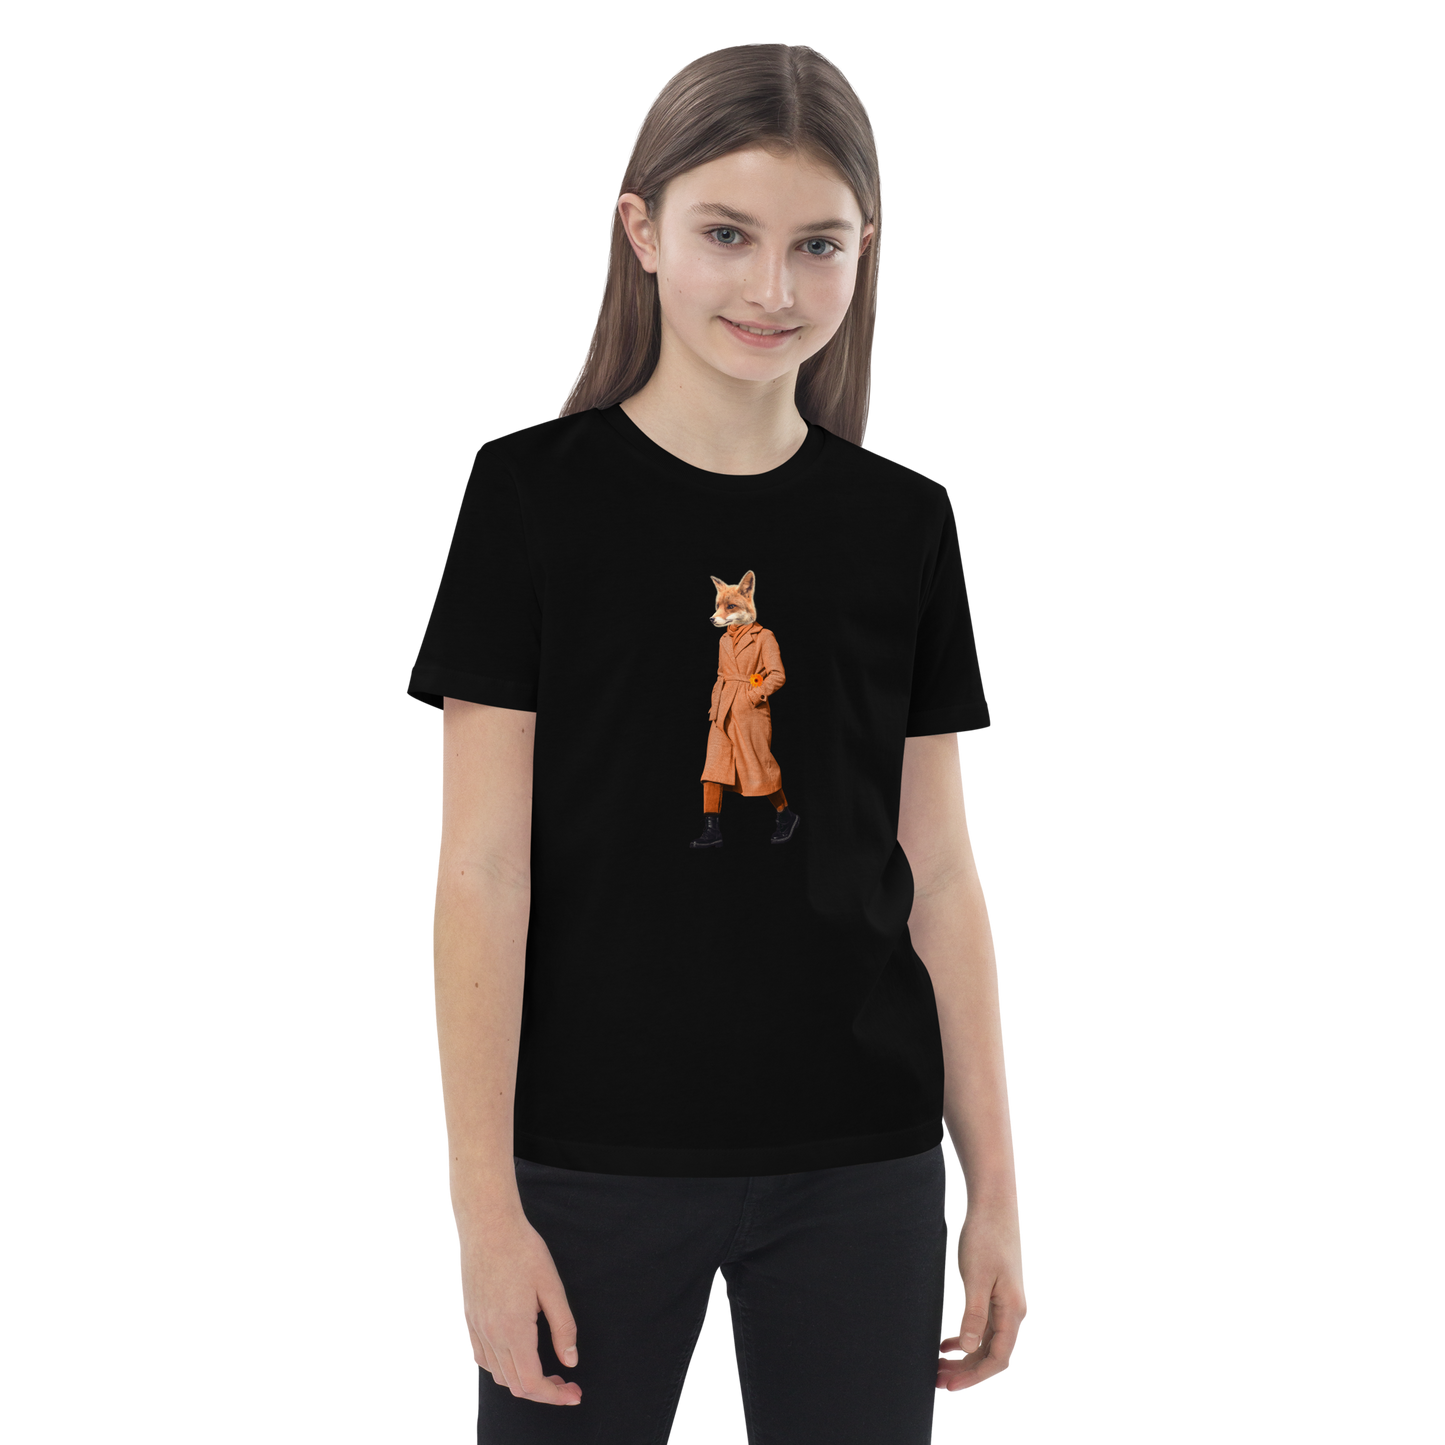 Young girl wearing a Black Anthropomorphic Fox Organic Cotton Kids T-Shirt featuring an Anthropomorphic Fox In a Trench Coat graphic on the chest - Kids' Graphic Tees - Funny Animal T-Shirts - Boozy Fox